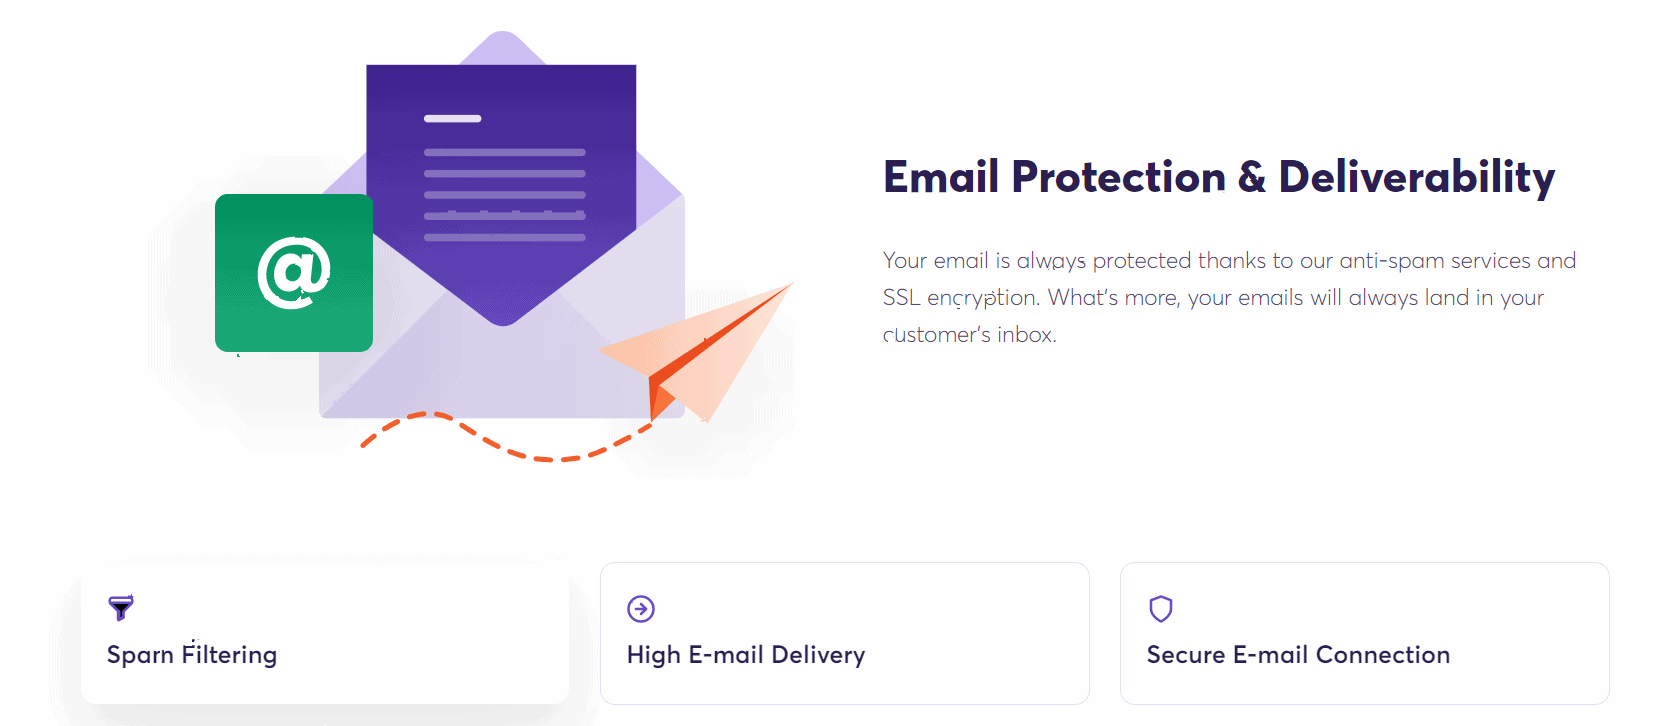 Email Protection and Deliverability- Chemicloud Review